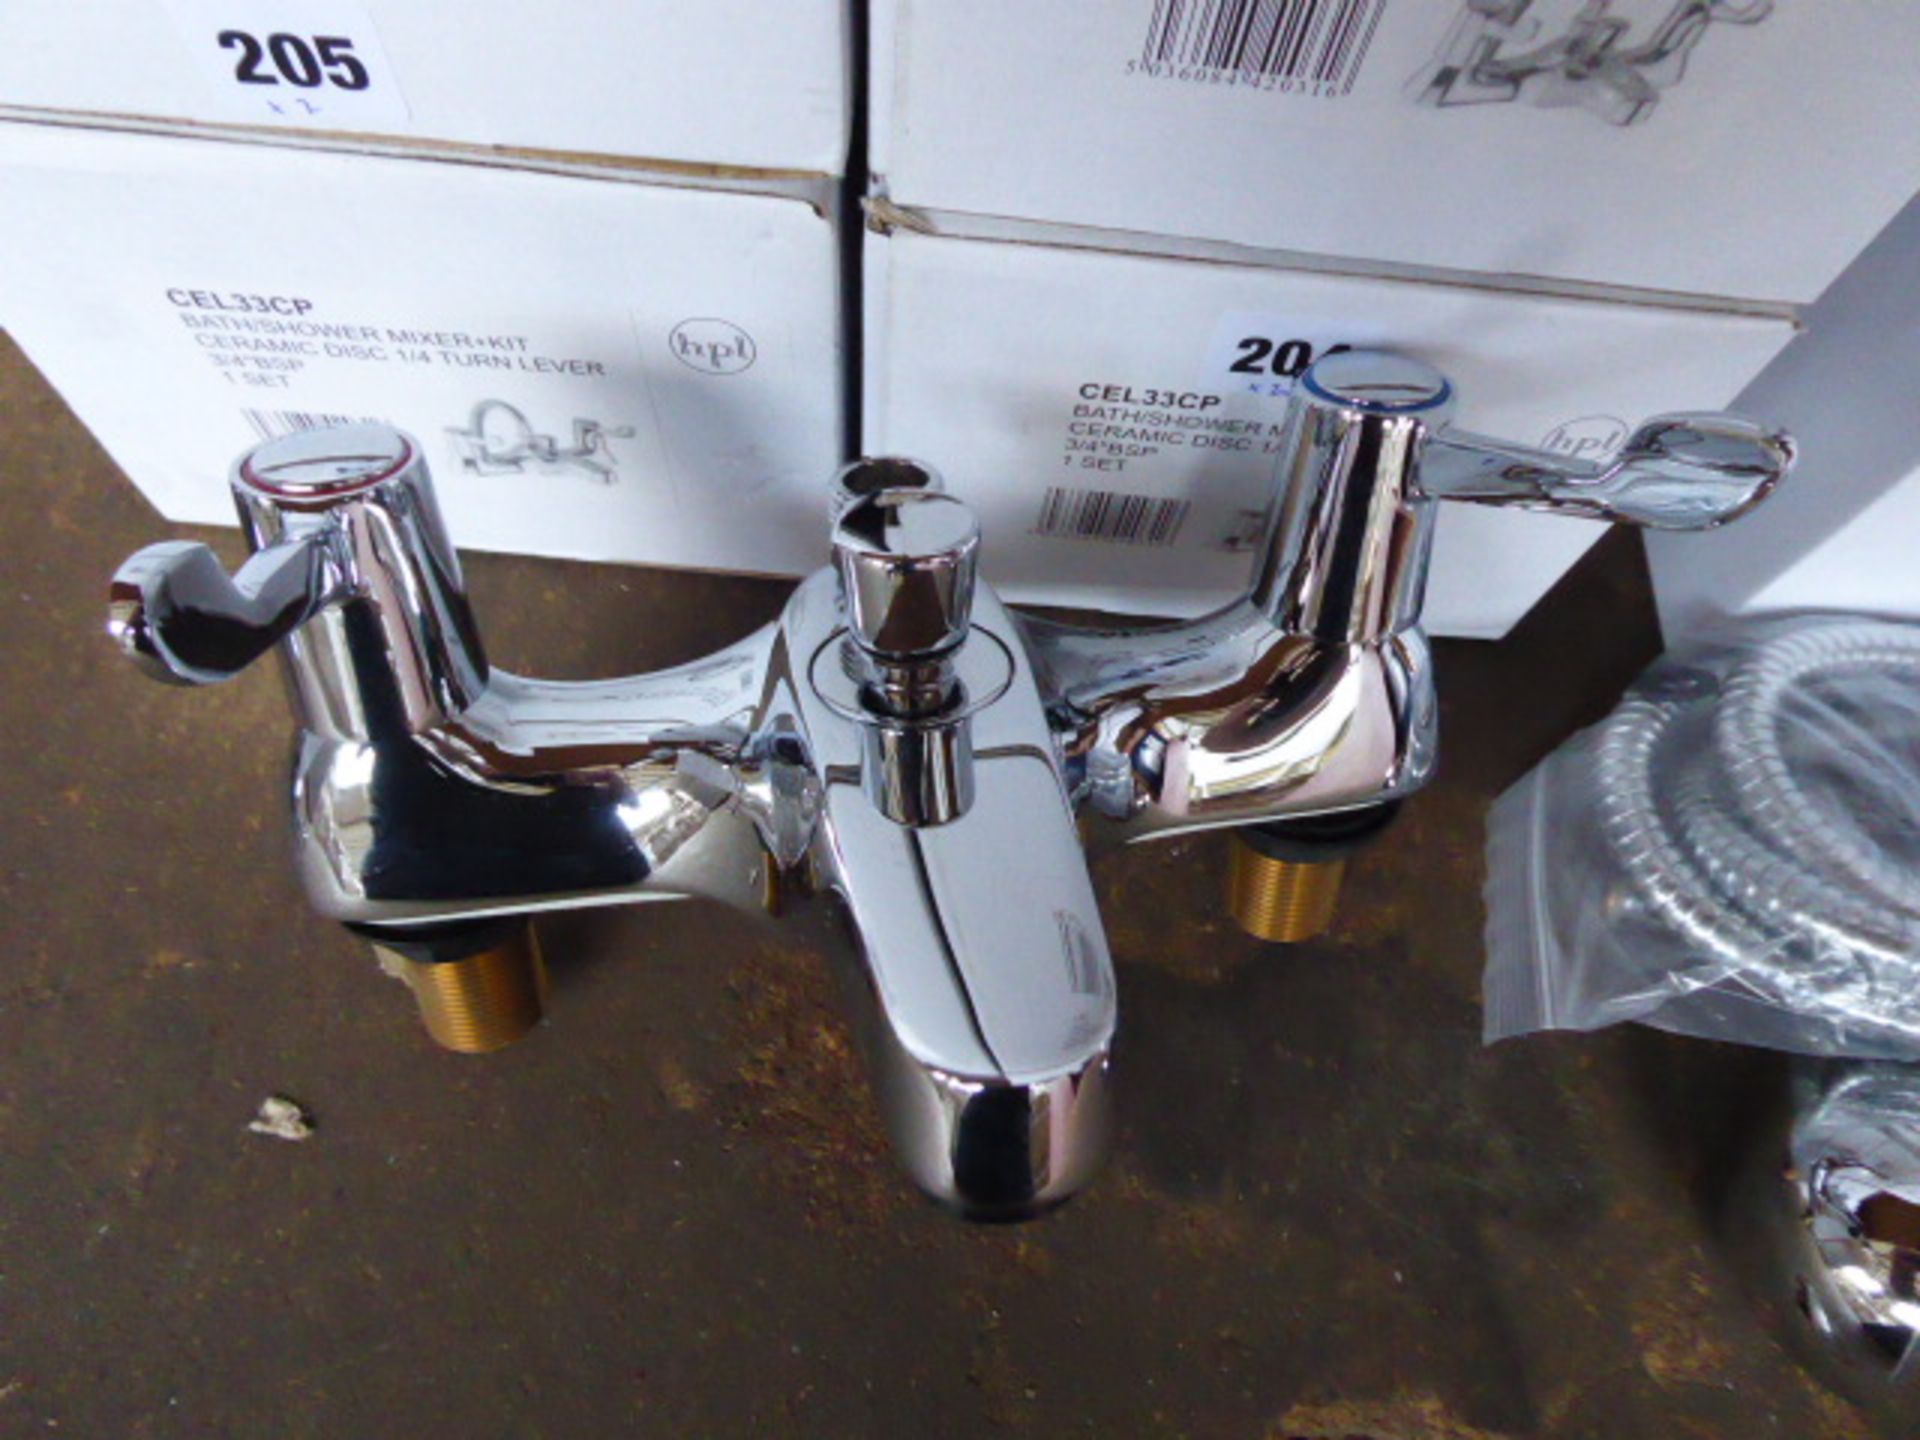 3 bath shower mixer kits with ceramic disc 1/4 turn lever - Image 2 of 2